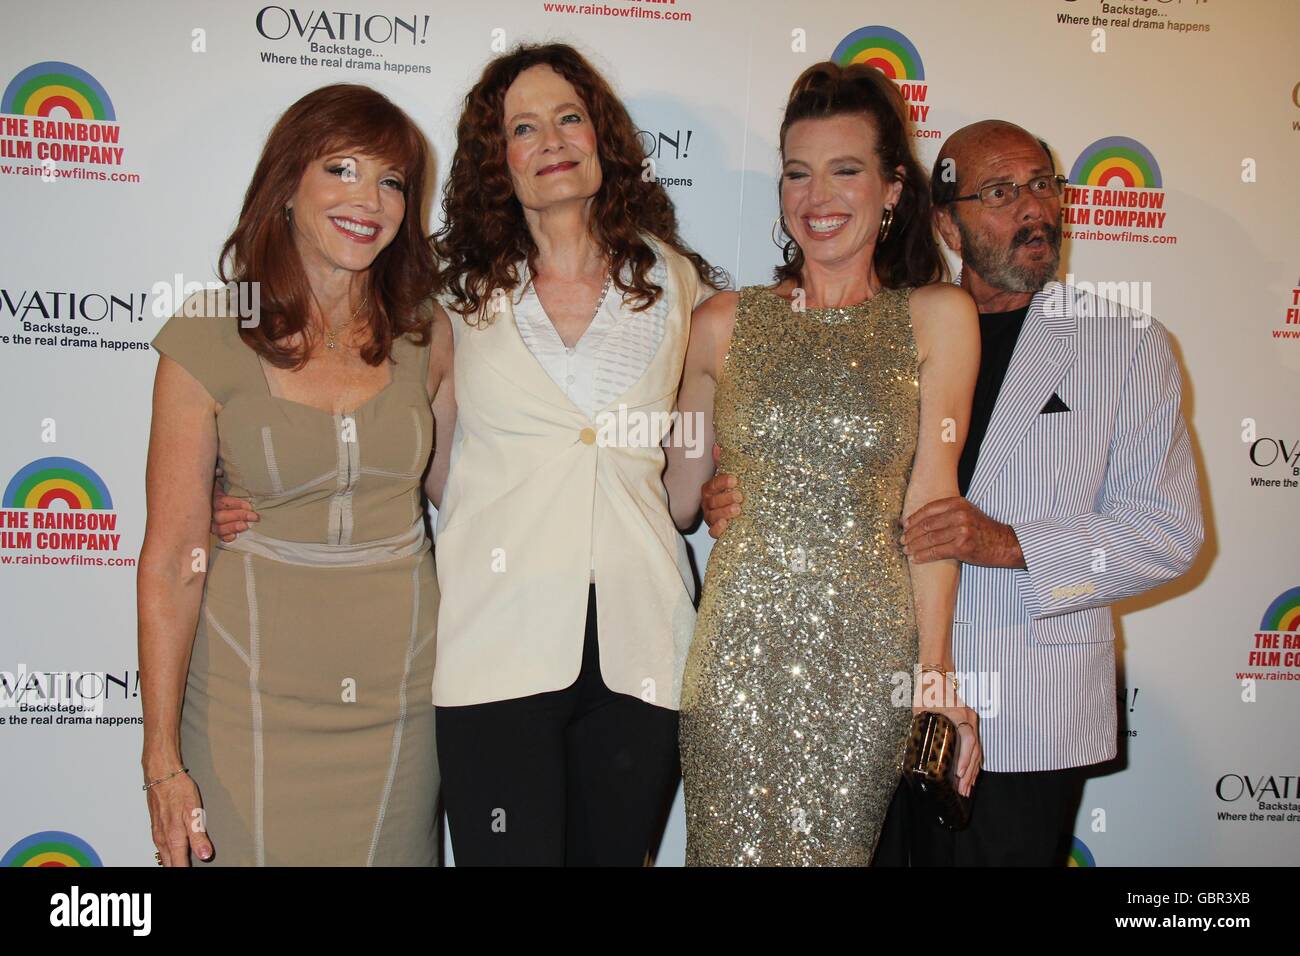 Hollywood, California, USA. 6th July, 2016. I15835CHW.The Rainbow Film Company Presents 'Ovation!' A New Film By Henry Jaglom - Los Angeles Premiere.DGA Theatre, Directors Guild Of America, Los Angeles, CA.07/06/2016.CATHY ARDEN, DIANE SALINGER, TANNA FREDERICK AND ZACK NORMAN . © Clinton H. Wallace/Photomundo International/ Photos Inc Credit:  Clinton Wallace/Globe Photos/ZUMA Wire/Alamy Live News Stock Photo